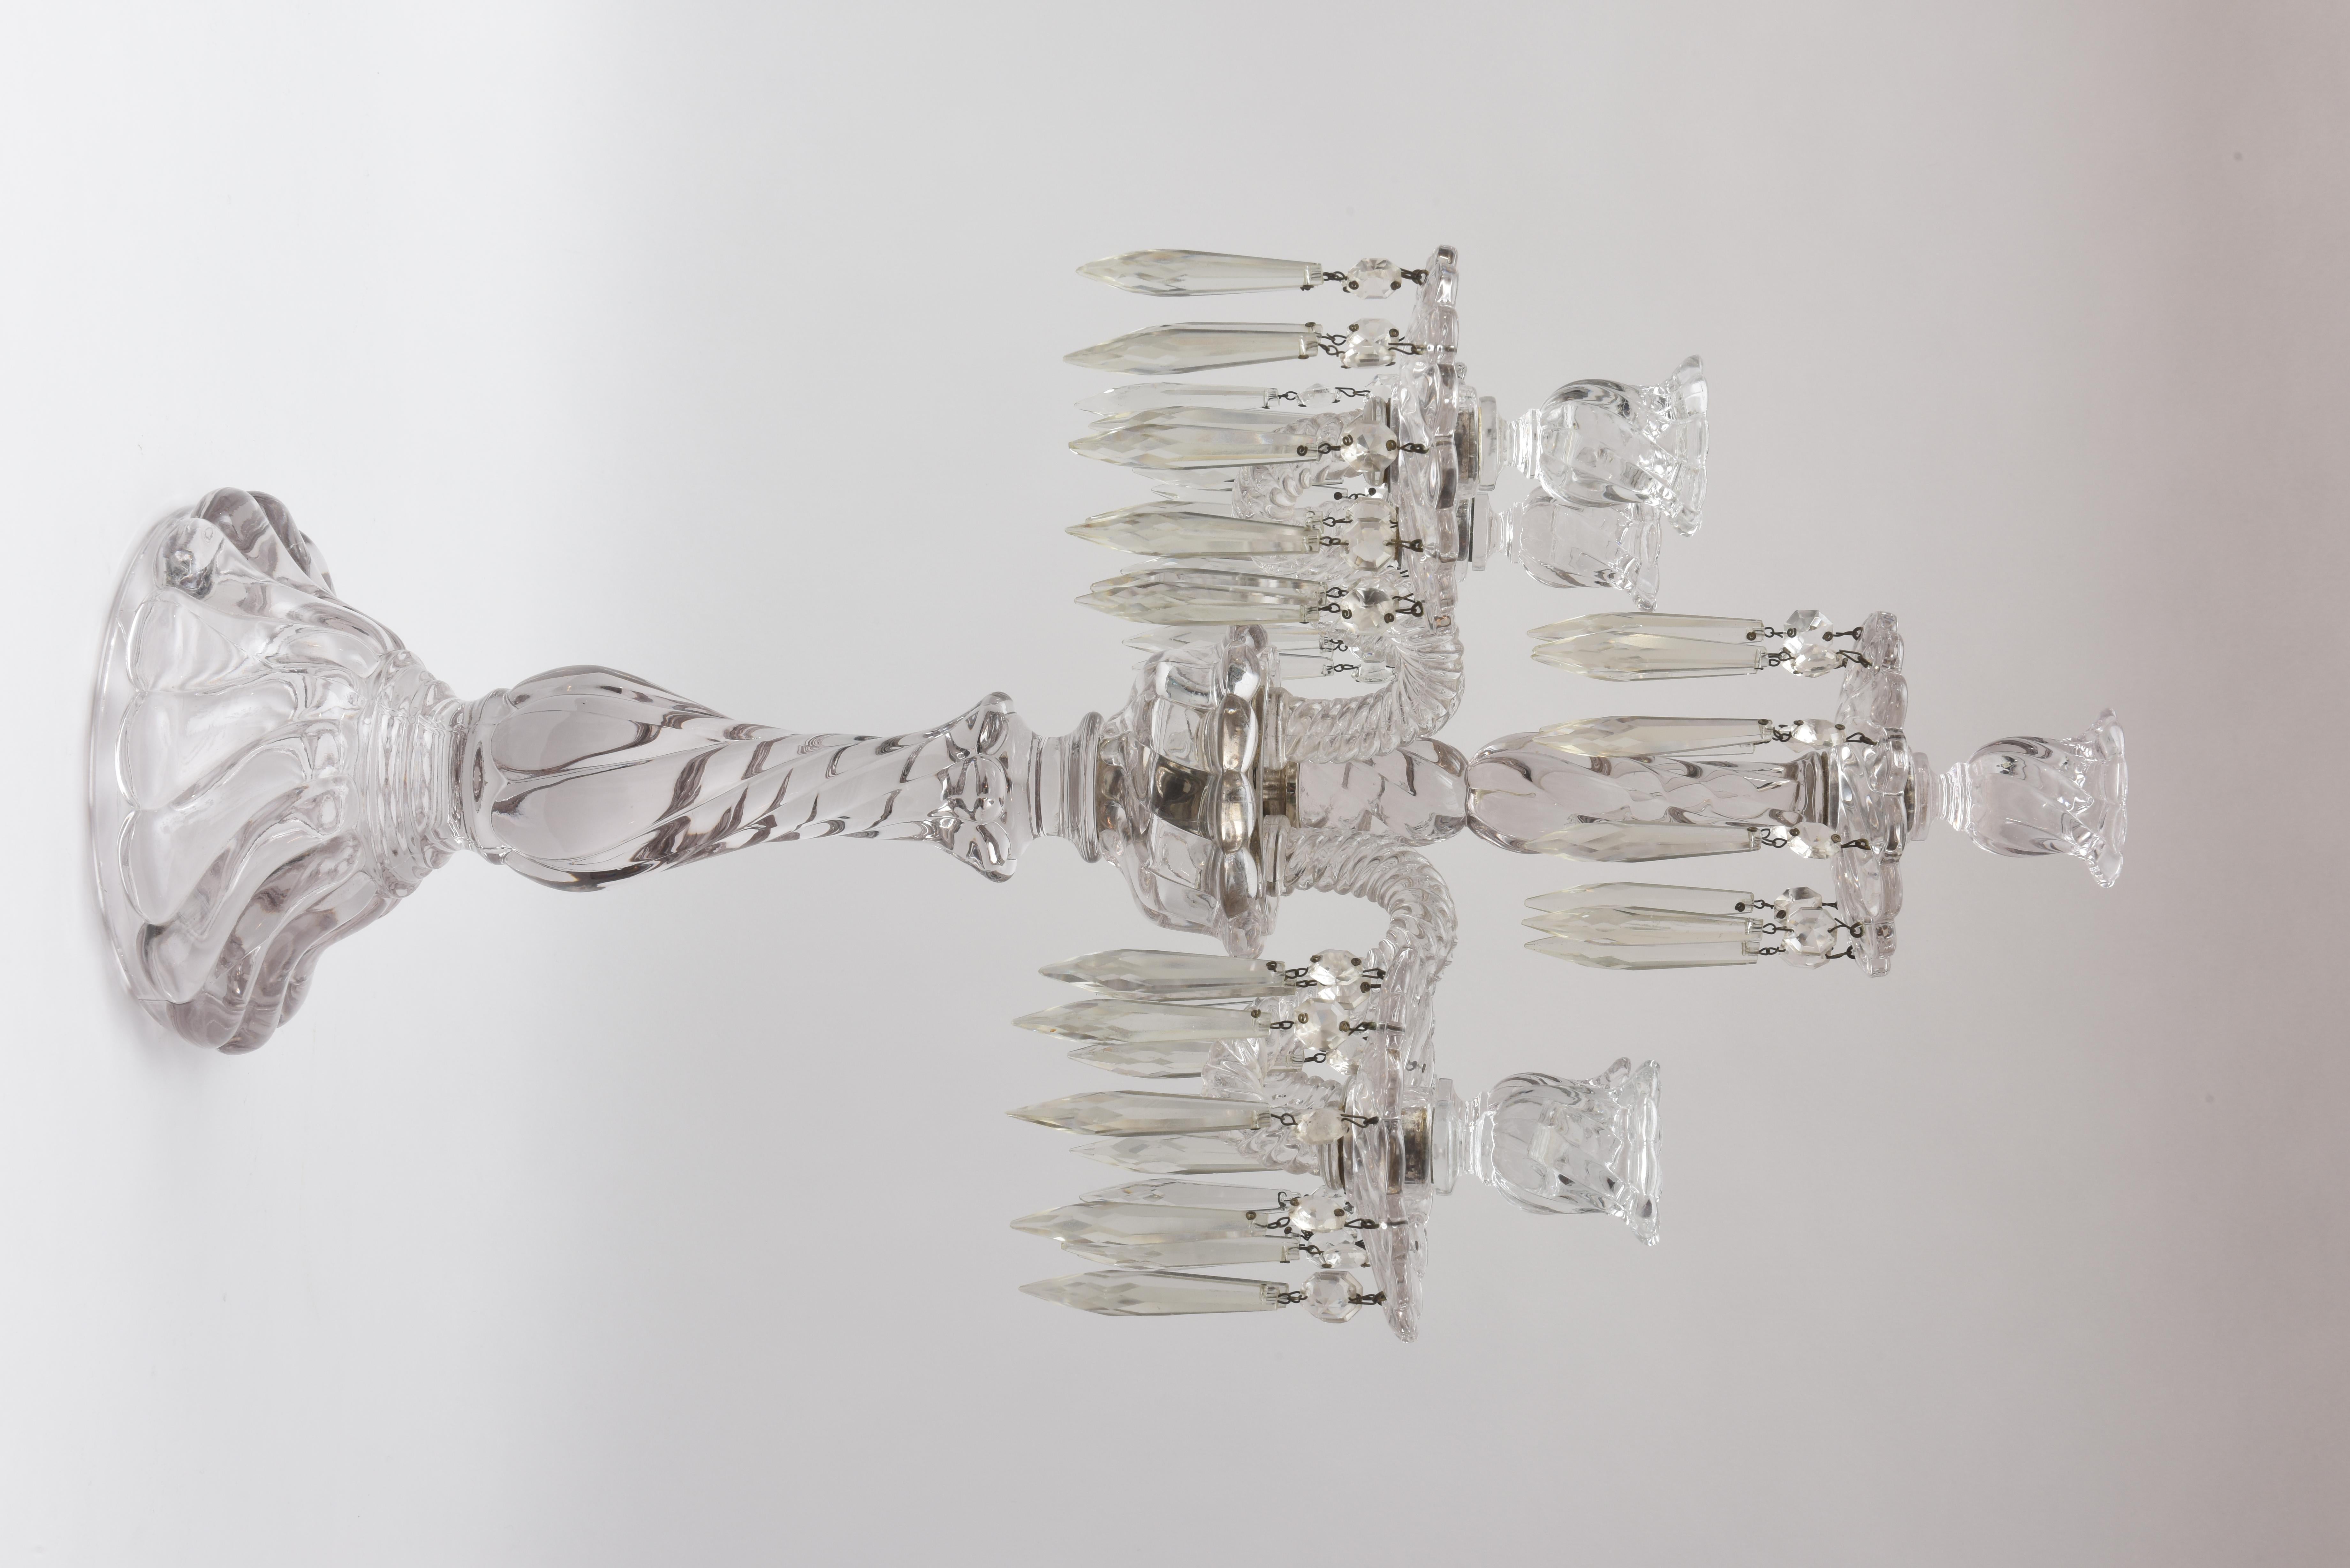 Hand-Crafted Baccarat Style Tall Crystal Candelabra, 4 Arms and Central Stem, Original Prisms